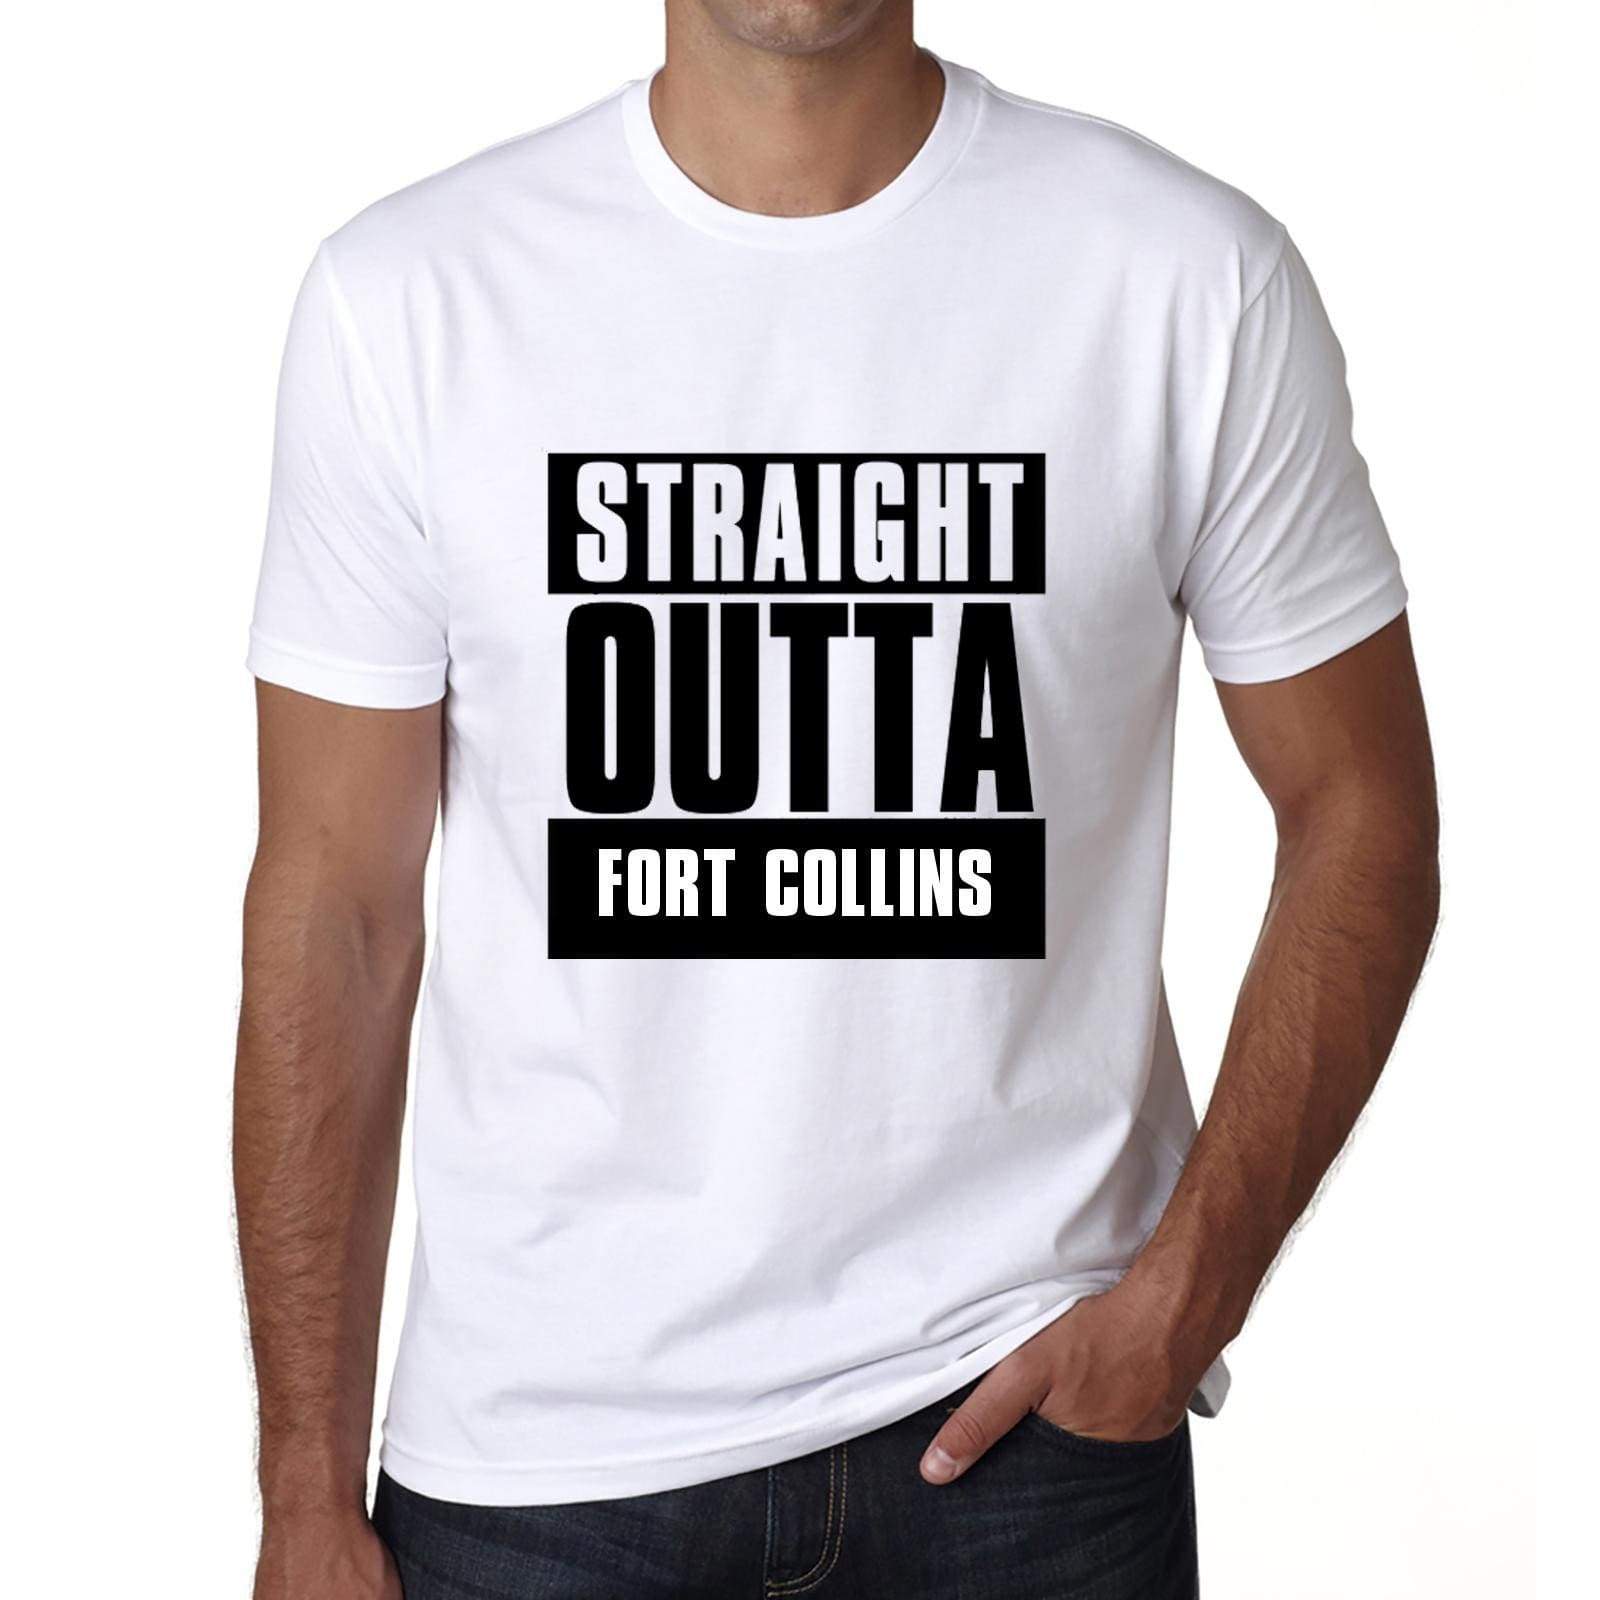 Straight Outta Fort Collins Mens Short Sleeve Round Neck T-Shirt 00027 - White / S - Casual